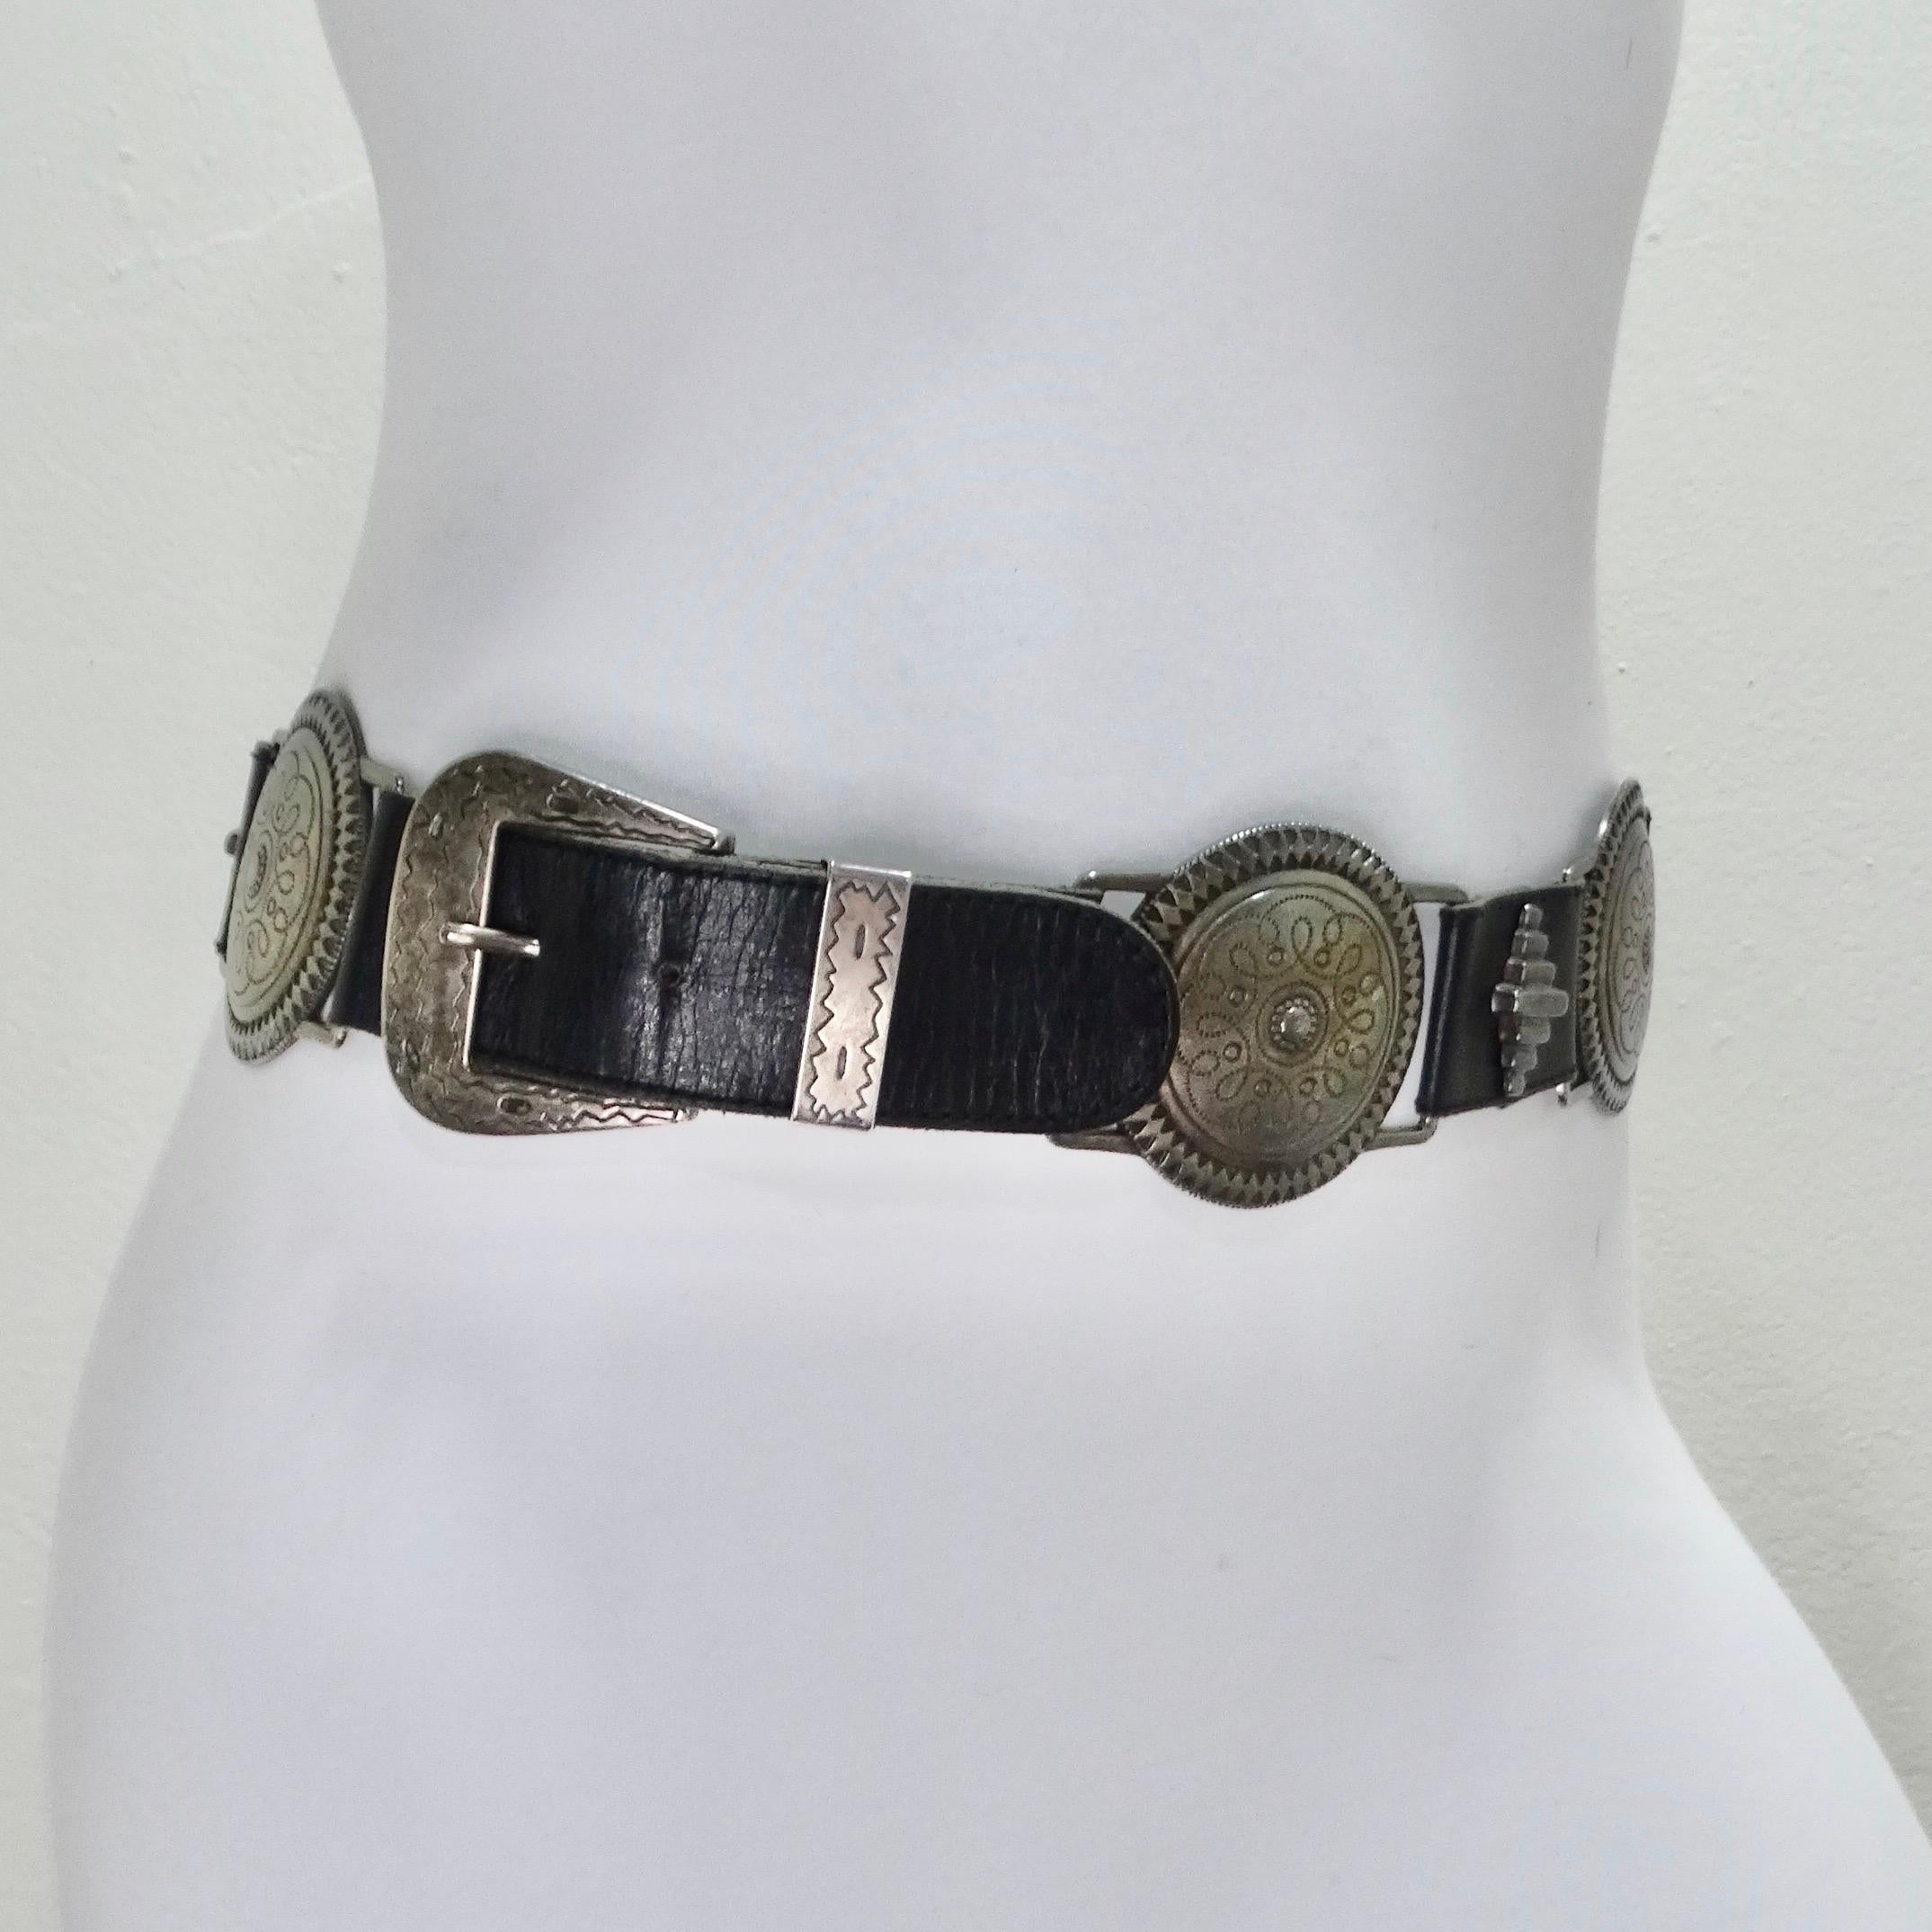 Introducing this timeless 1990s black leather belt, a must-have accessory that effortlessly combines vintage allure with contemporary flair. Adorned with a series of silver-tone buckles, each intricately engraved with geometric patterns, this belt